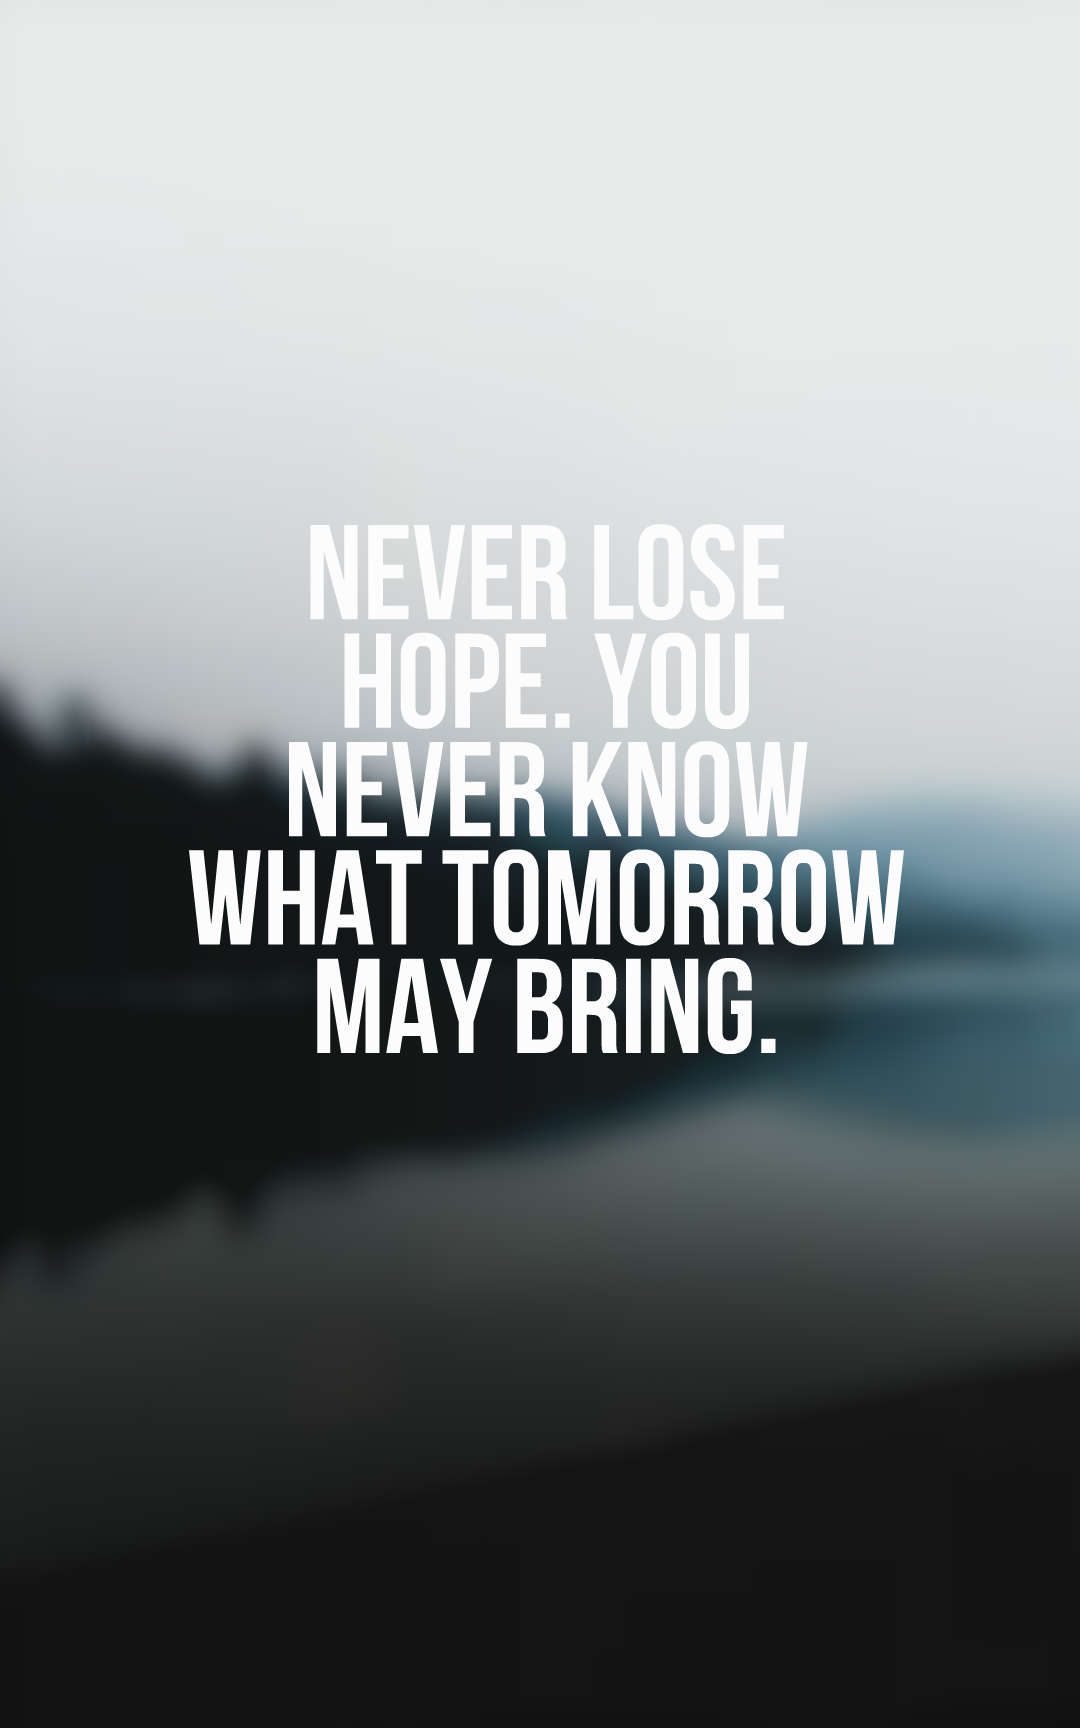 Never lose hope. You never know what tomorrow may bring.